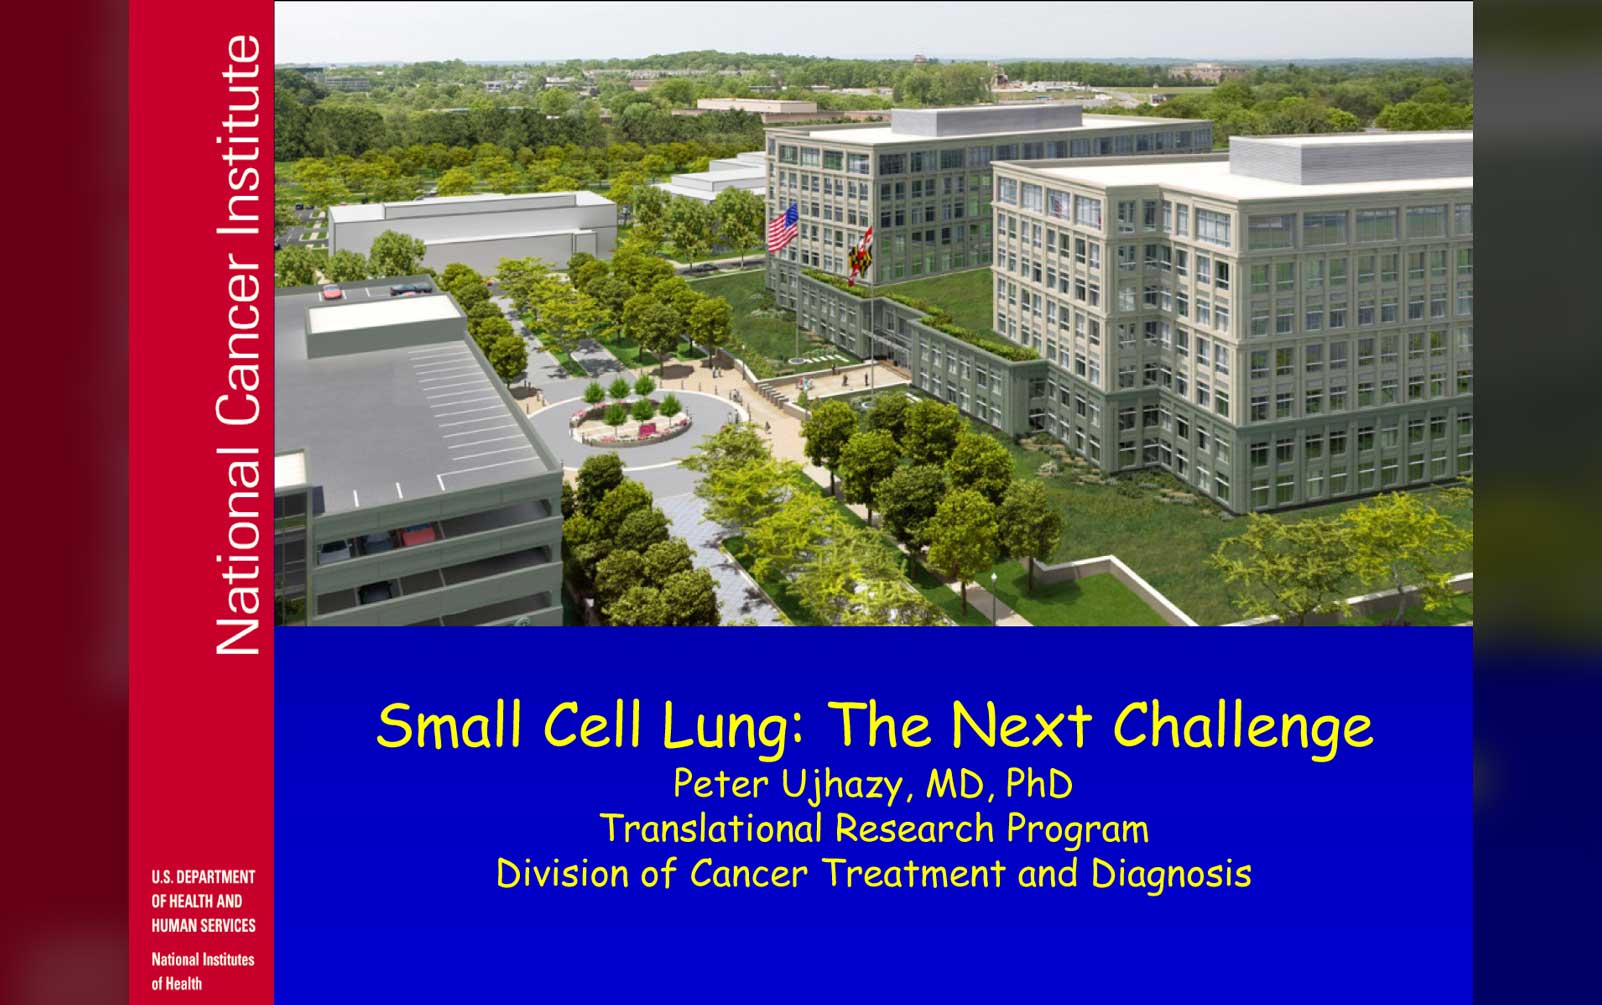 Small Cell Lung Cancer: The Next Challenge